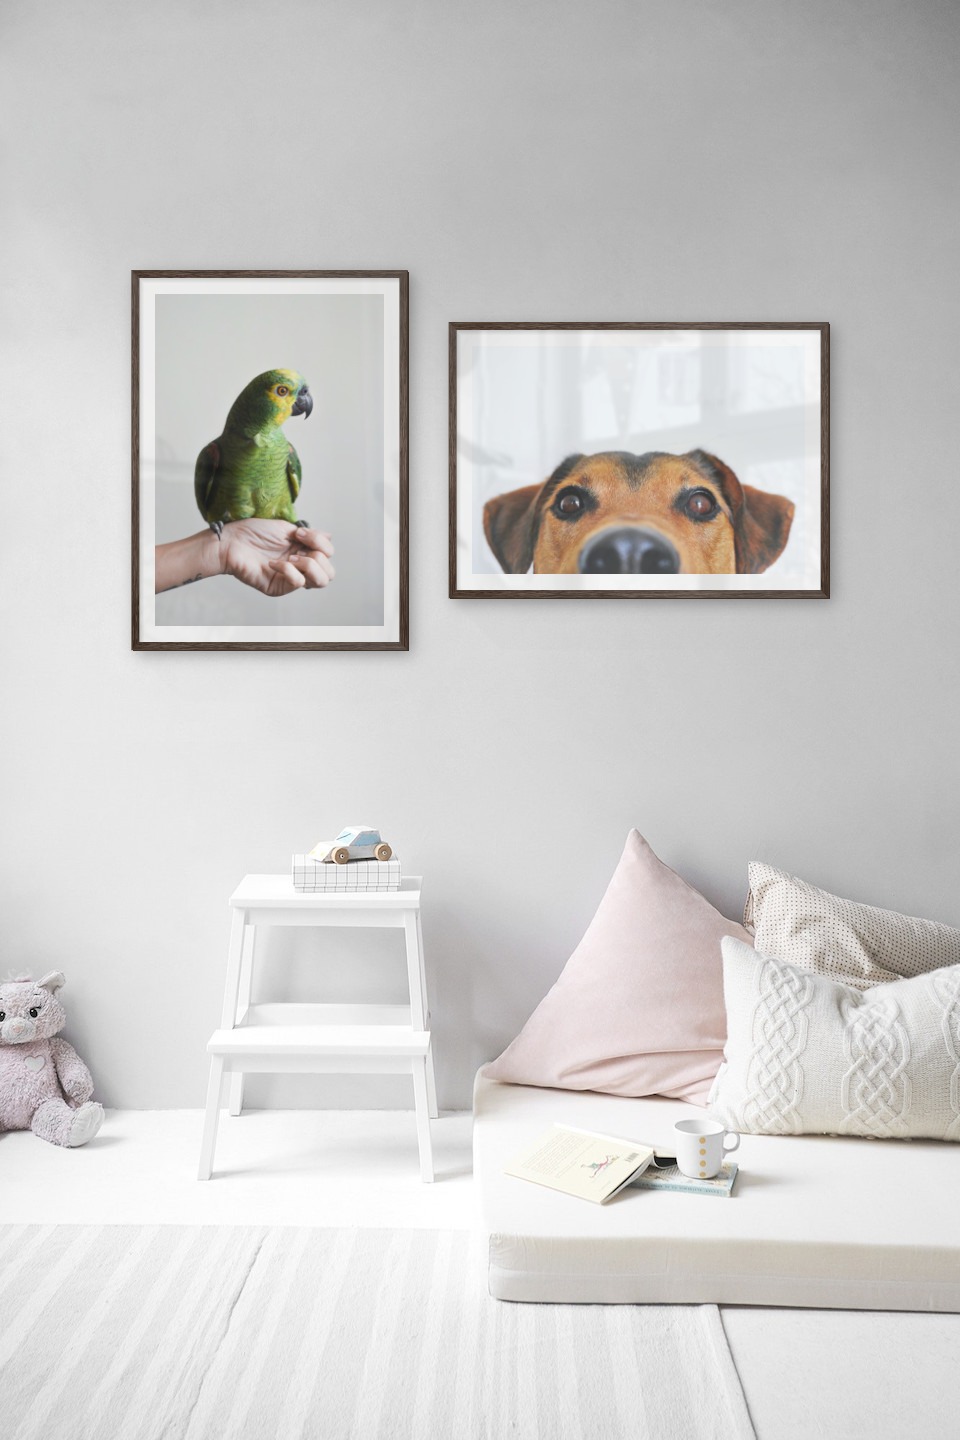 Gallery wall with picture frames in dark wood in sizes 50x70 with prints "Green parrot" and "Hundnos"